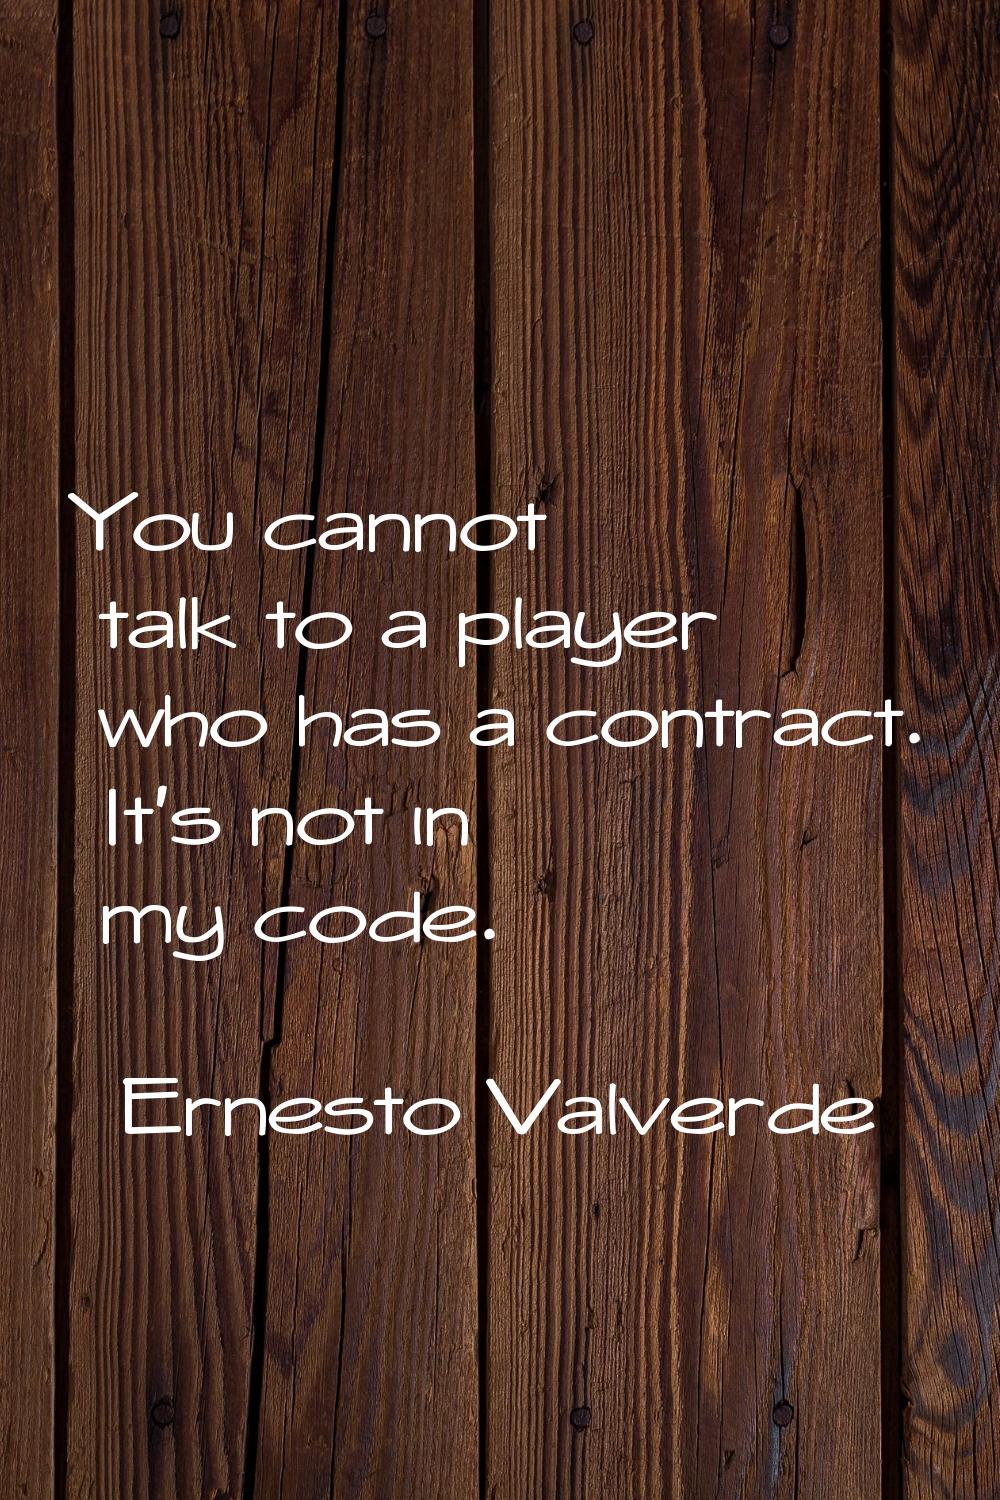 You cannot talk to a player who has a contract. It's not in my code.